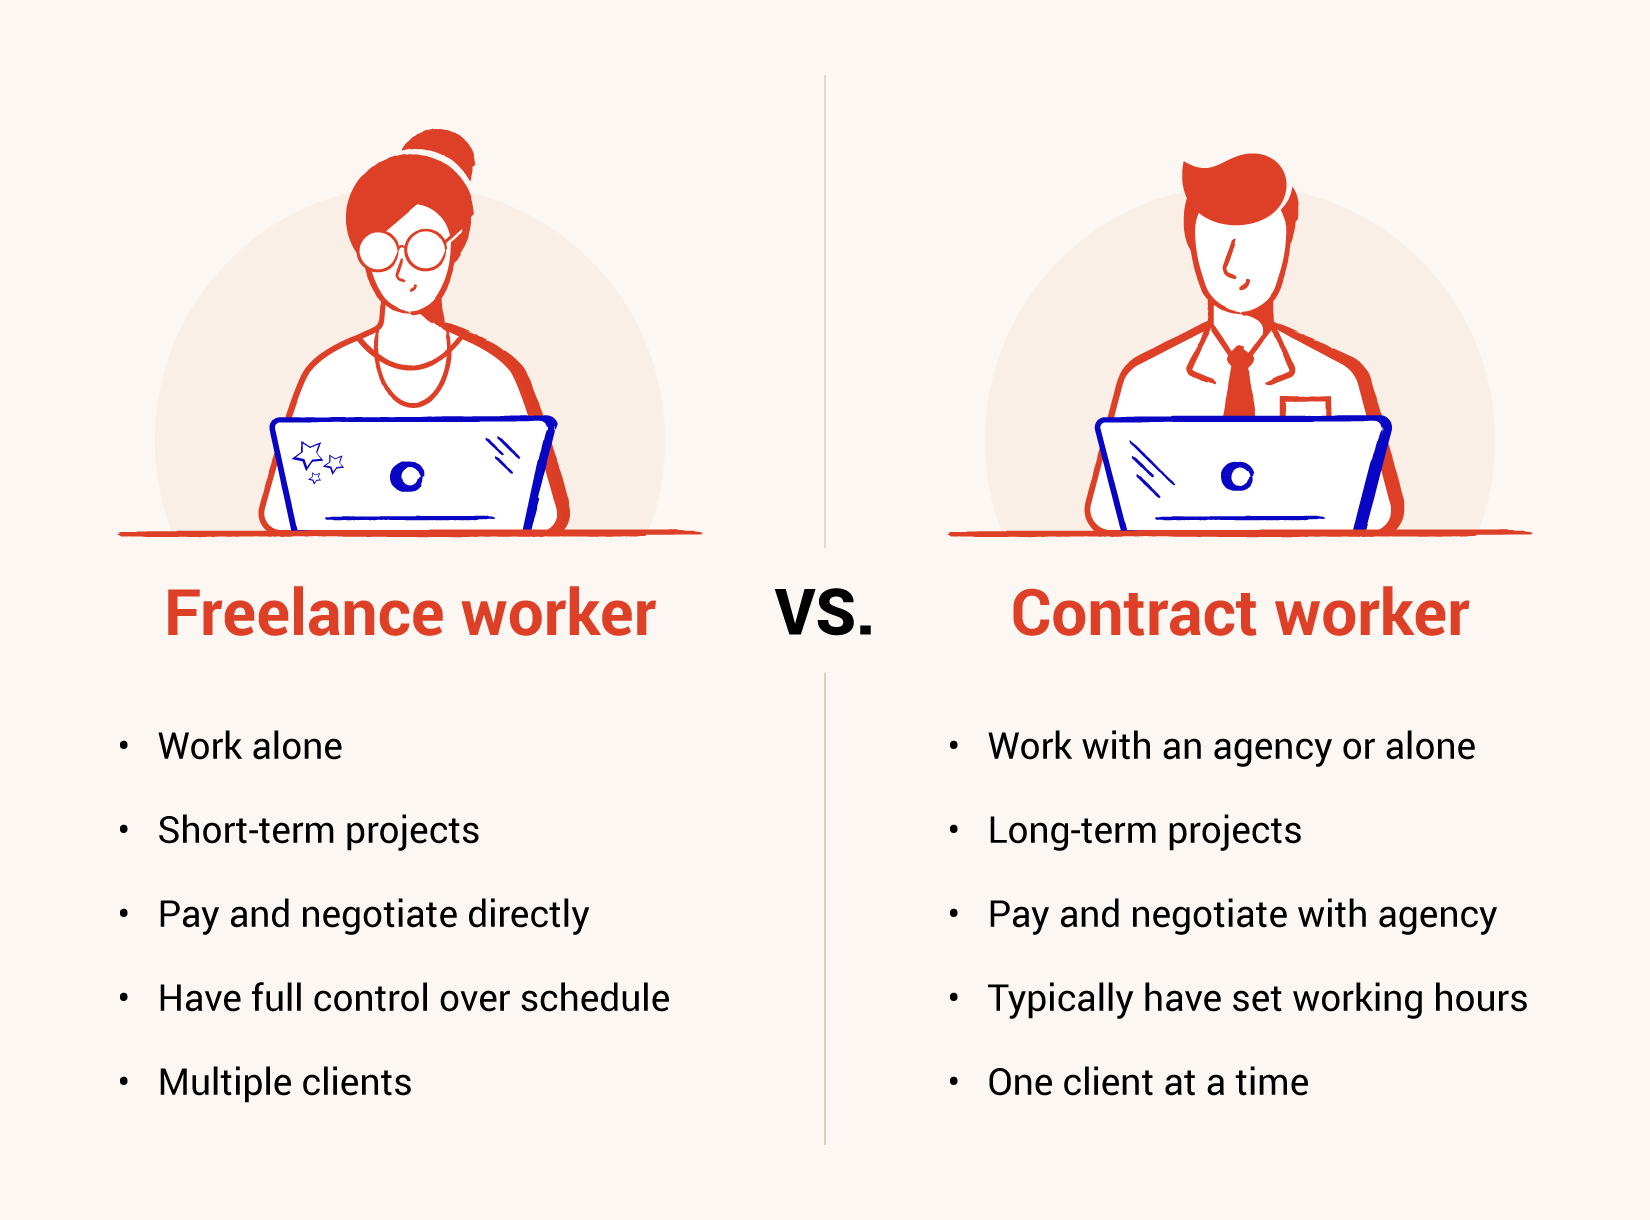 freelance worker vs contract worker comparison image